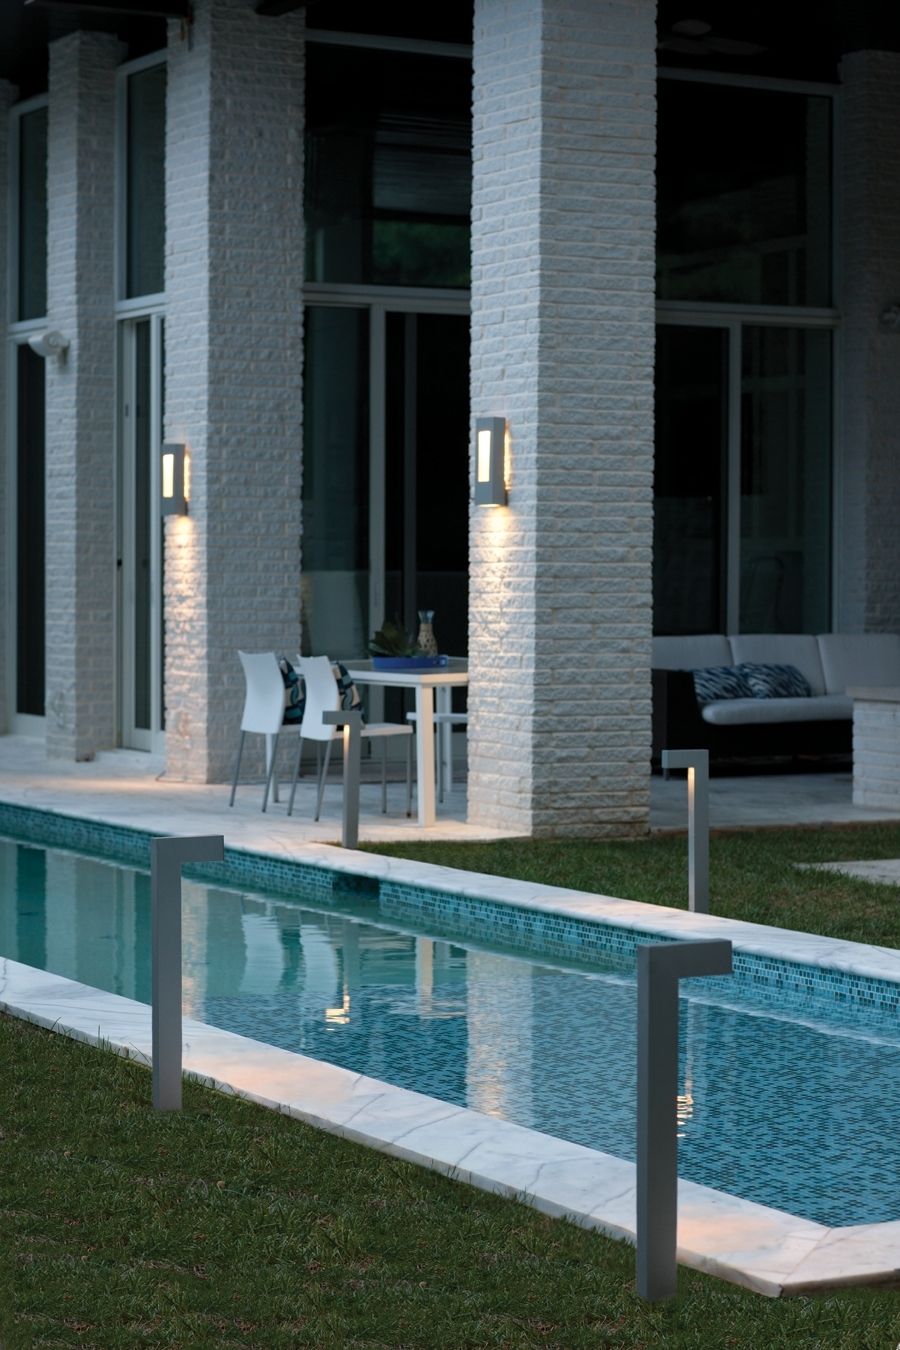 Hinkley Lighting Atlantis Collection Led Outdoor Lanterns And With Hinkley Lighting For Modern Garden (View 4 of 15)